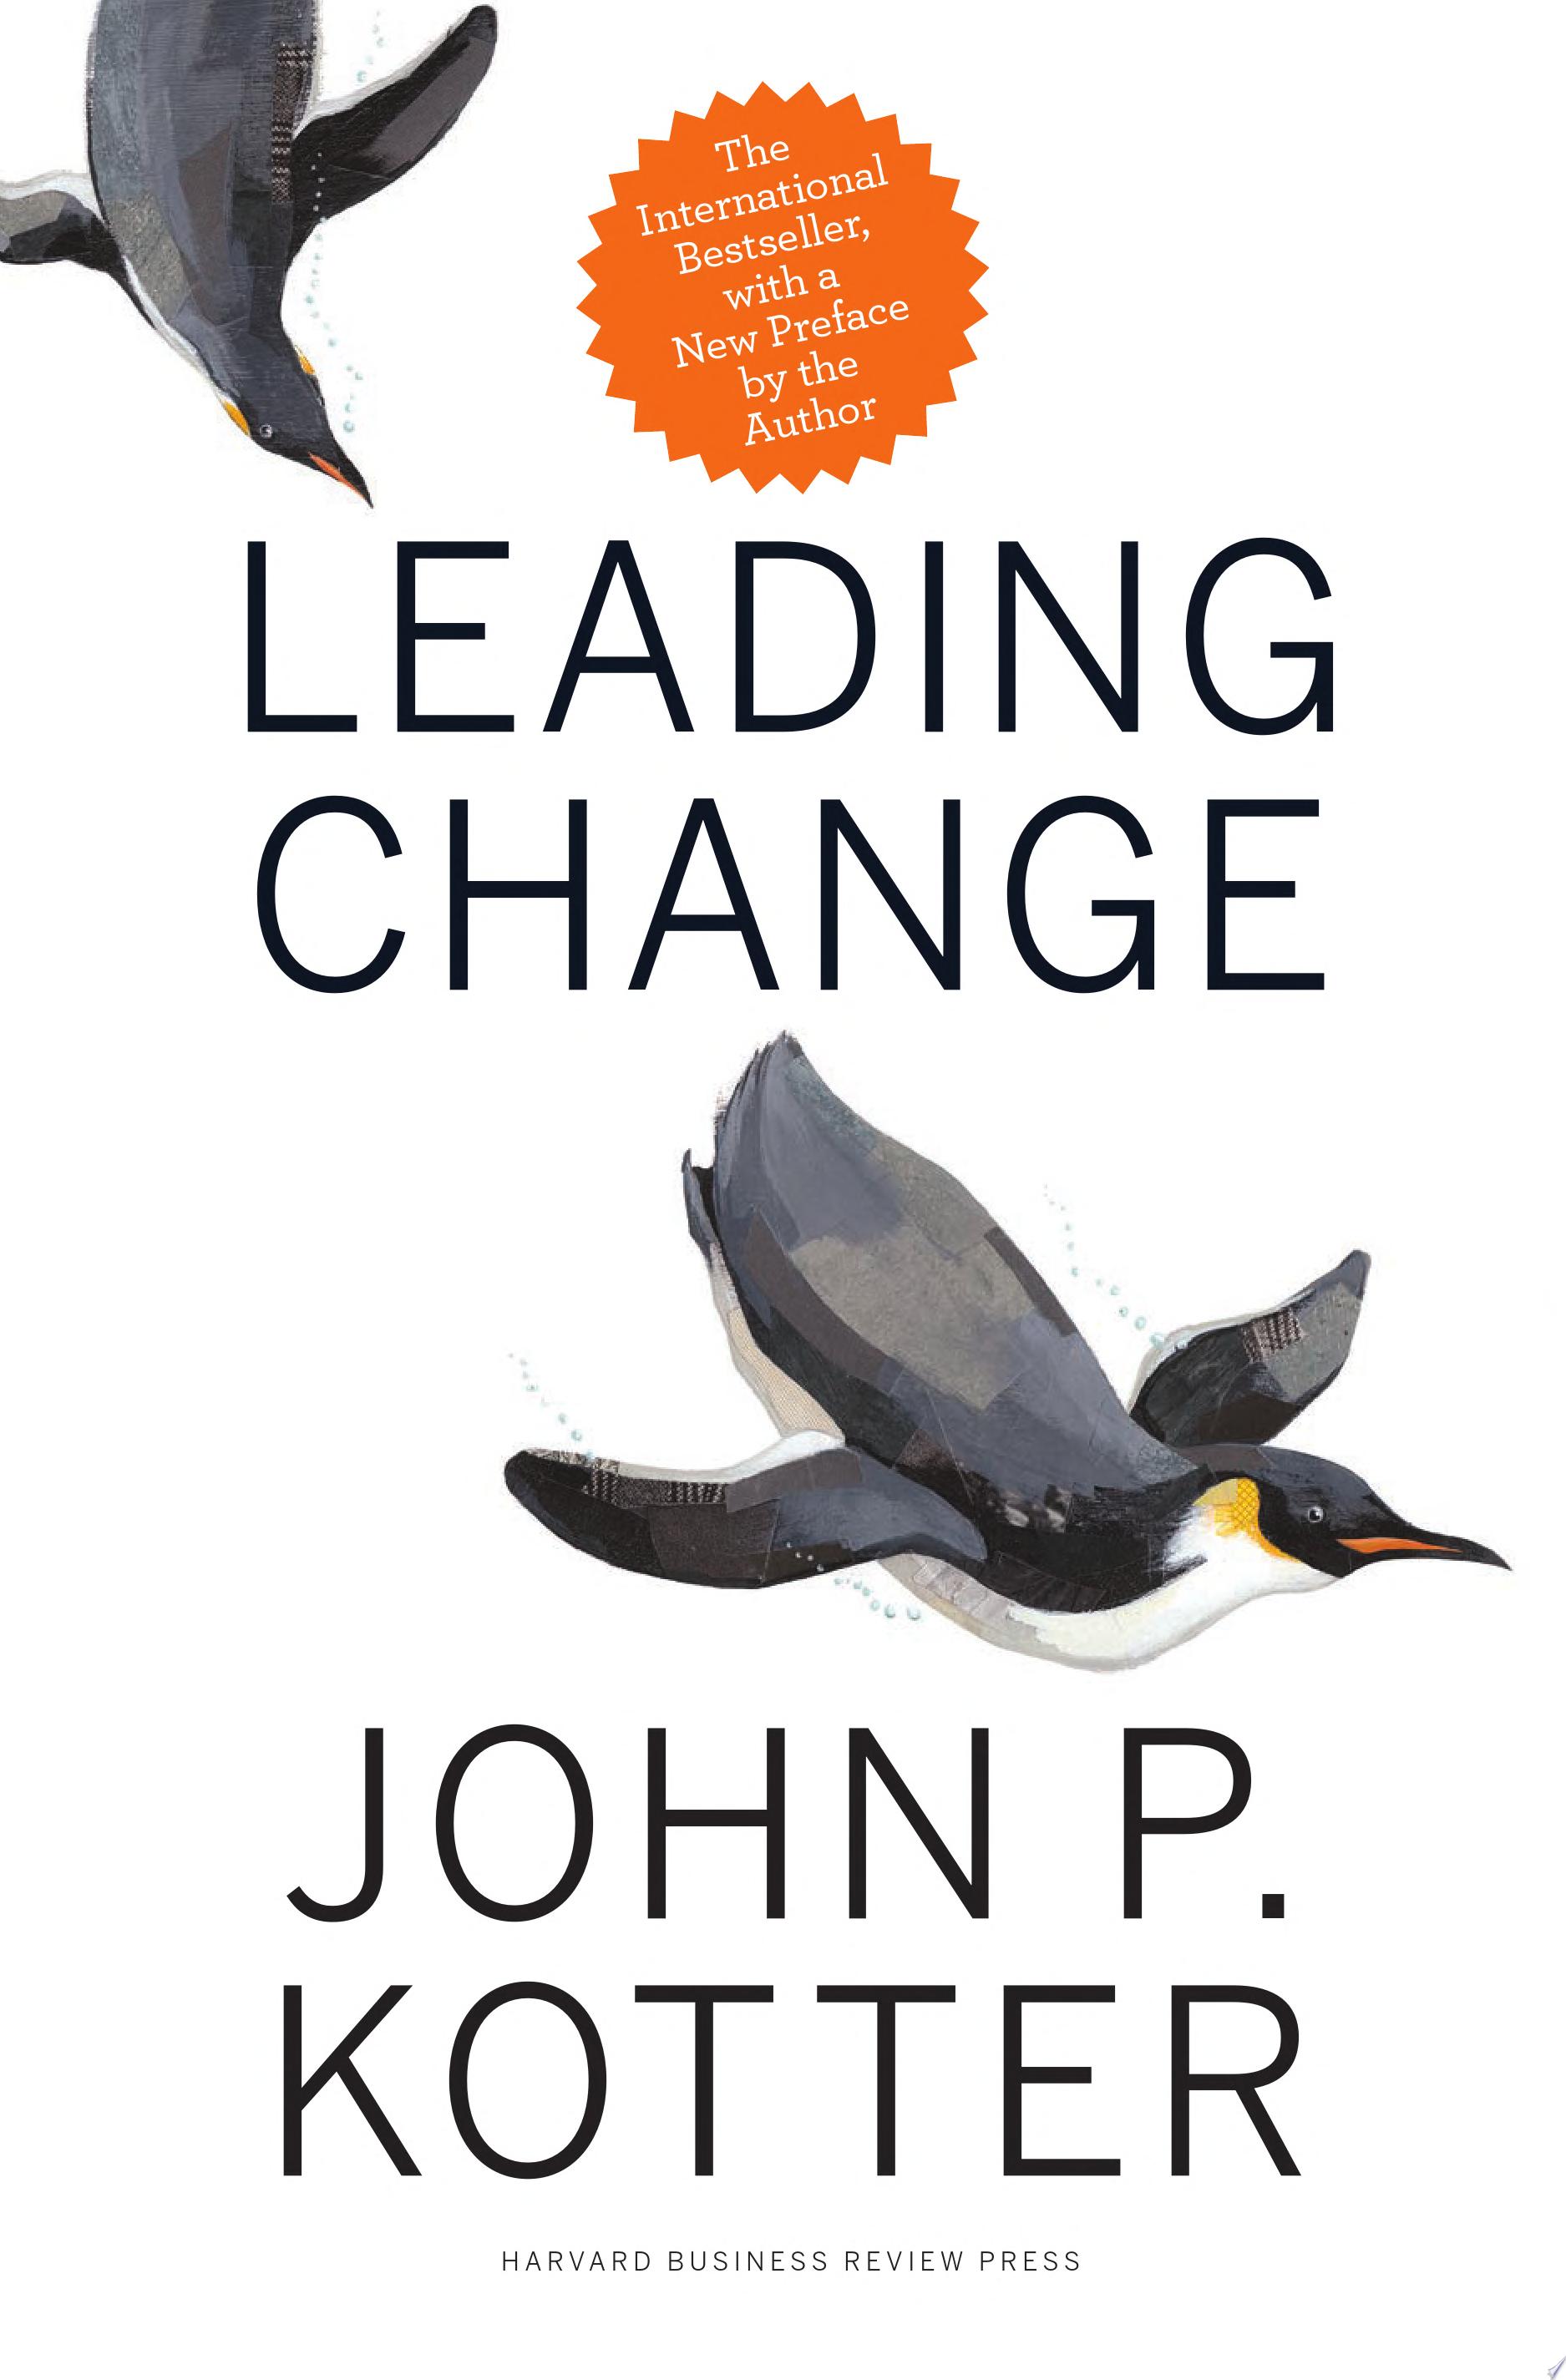 Image for "Leading Change"